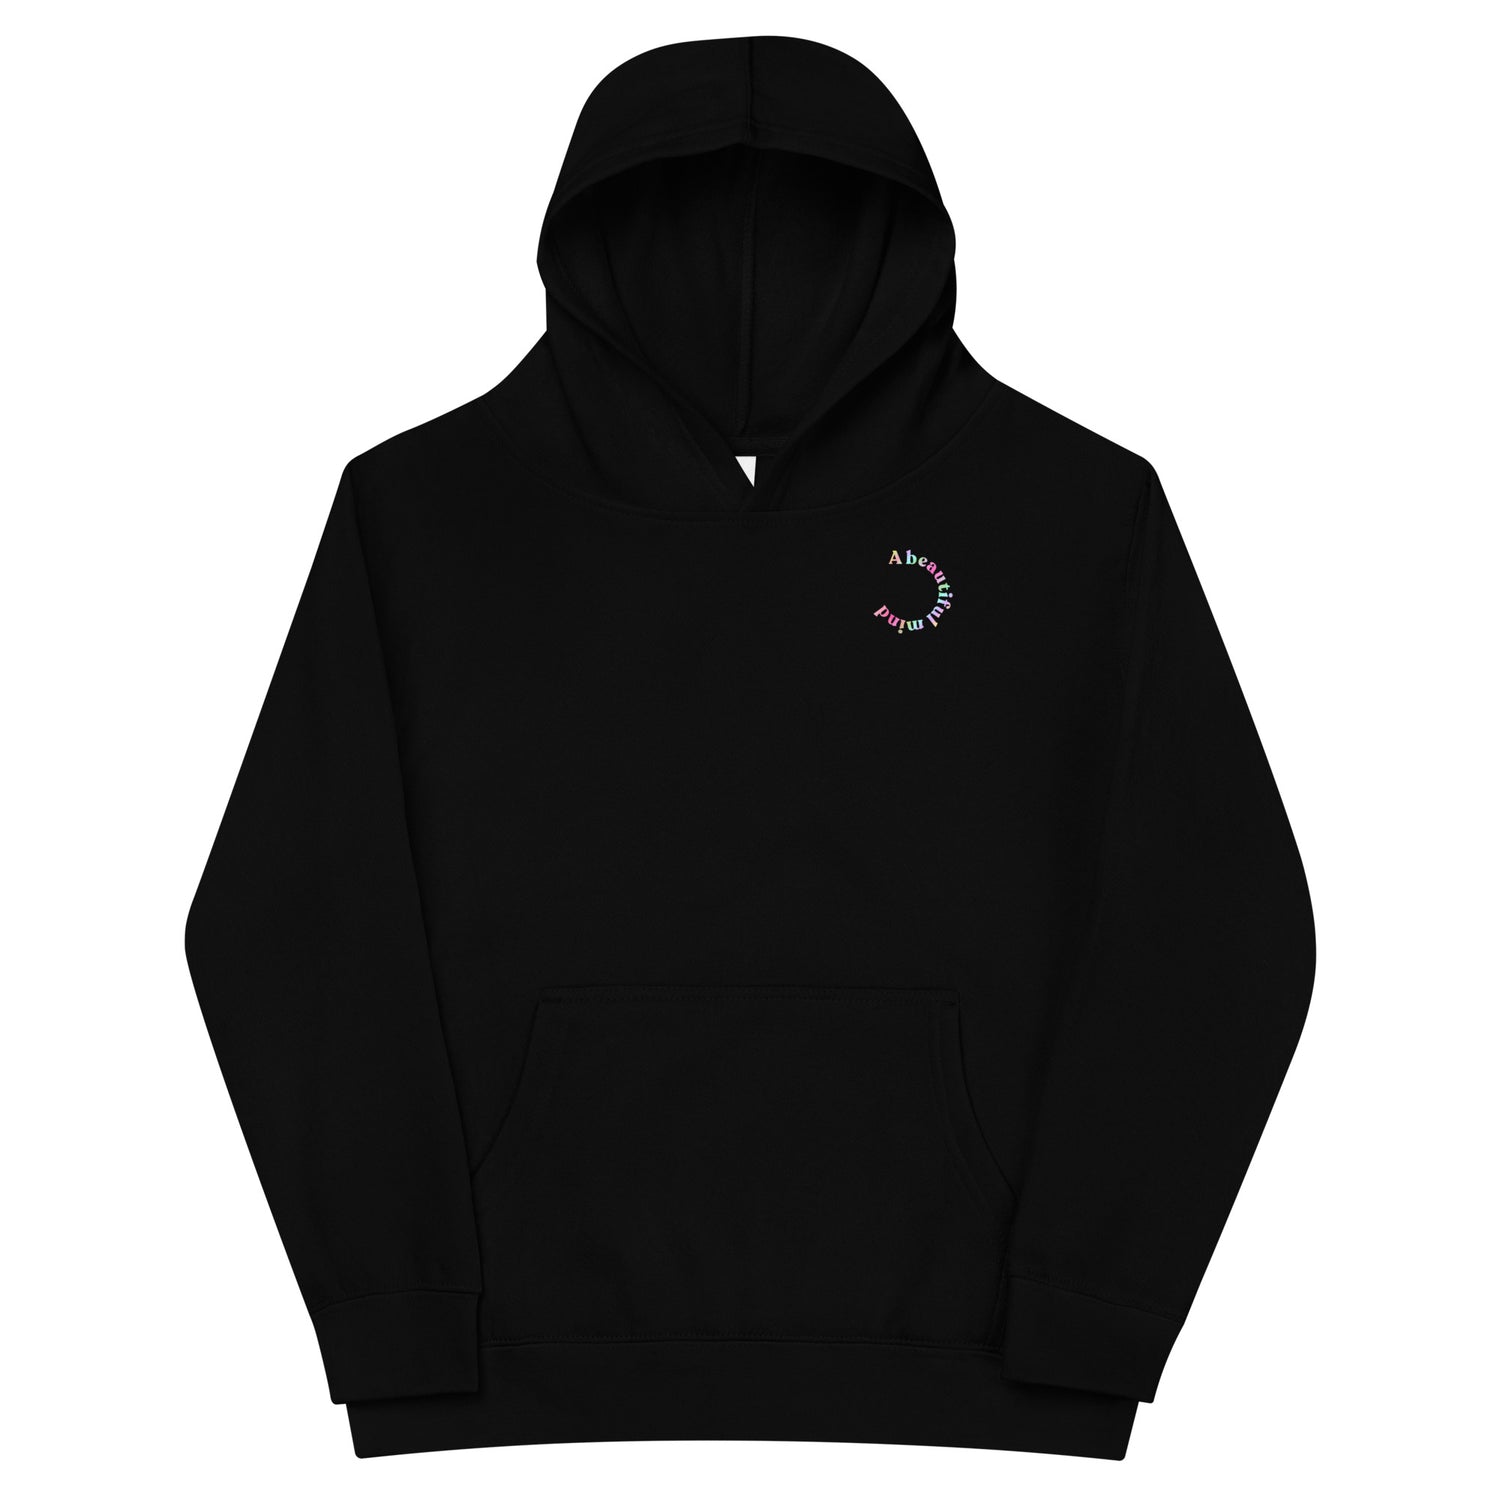 Black Kidswear hoodie featuring a "beautiful mind" design with pockets at front.